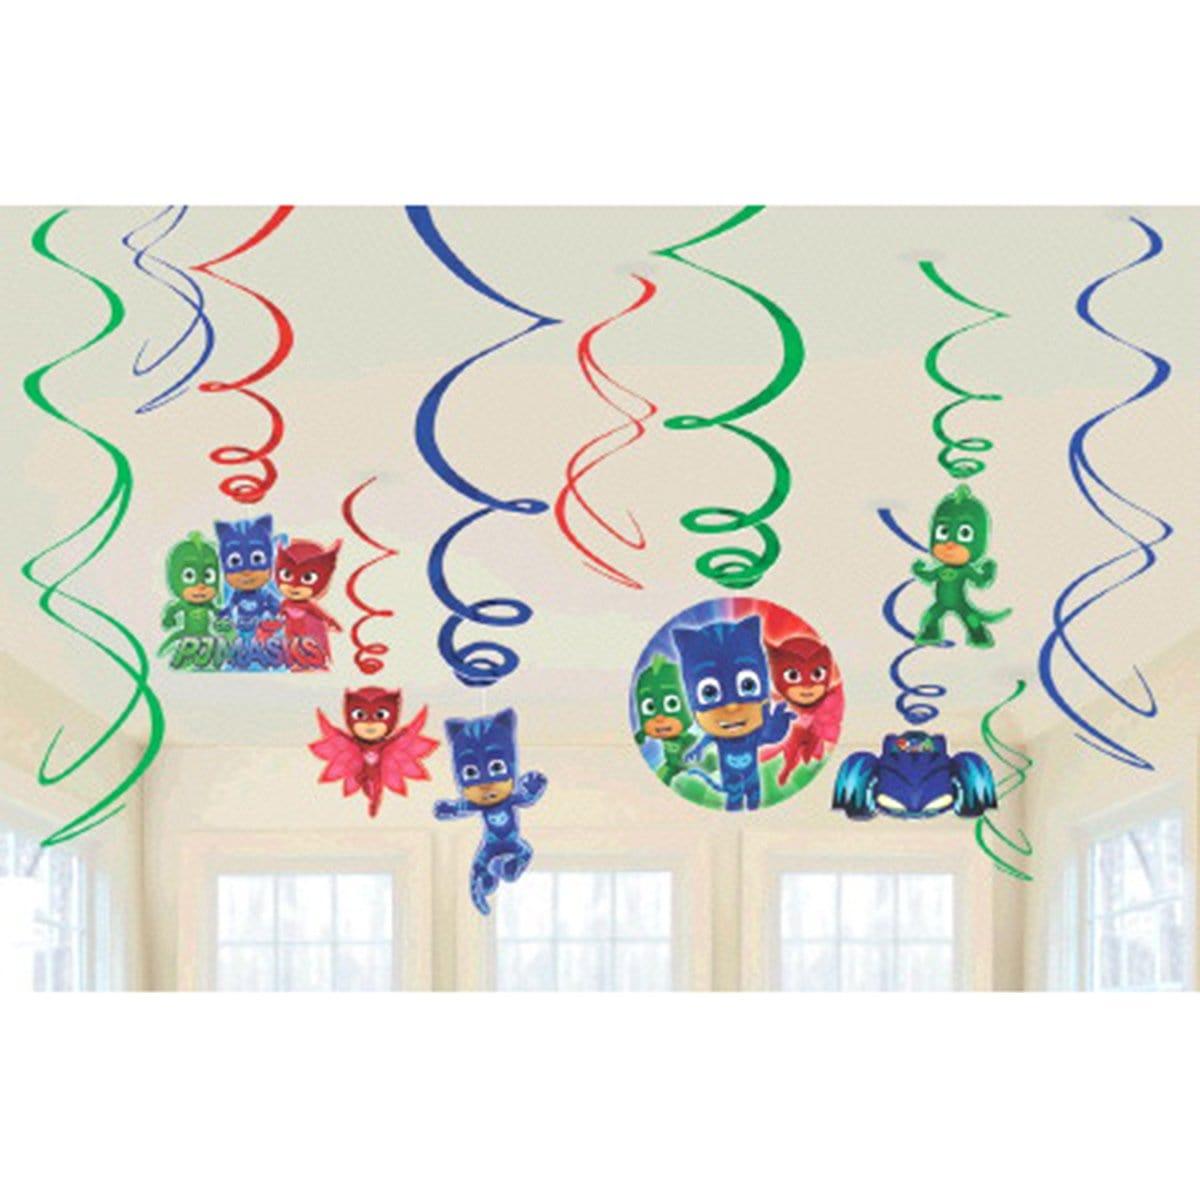 Buy Kids Birthday PJ Masks swirl decorations, 12 per package sold at Party Expert